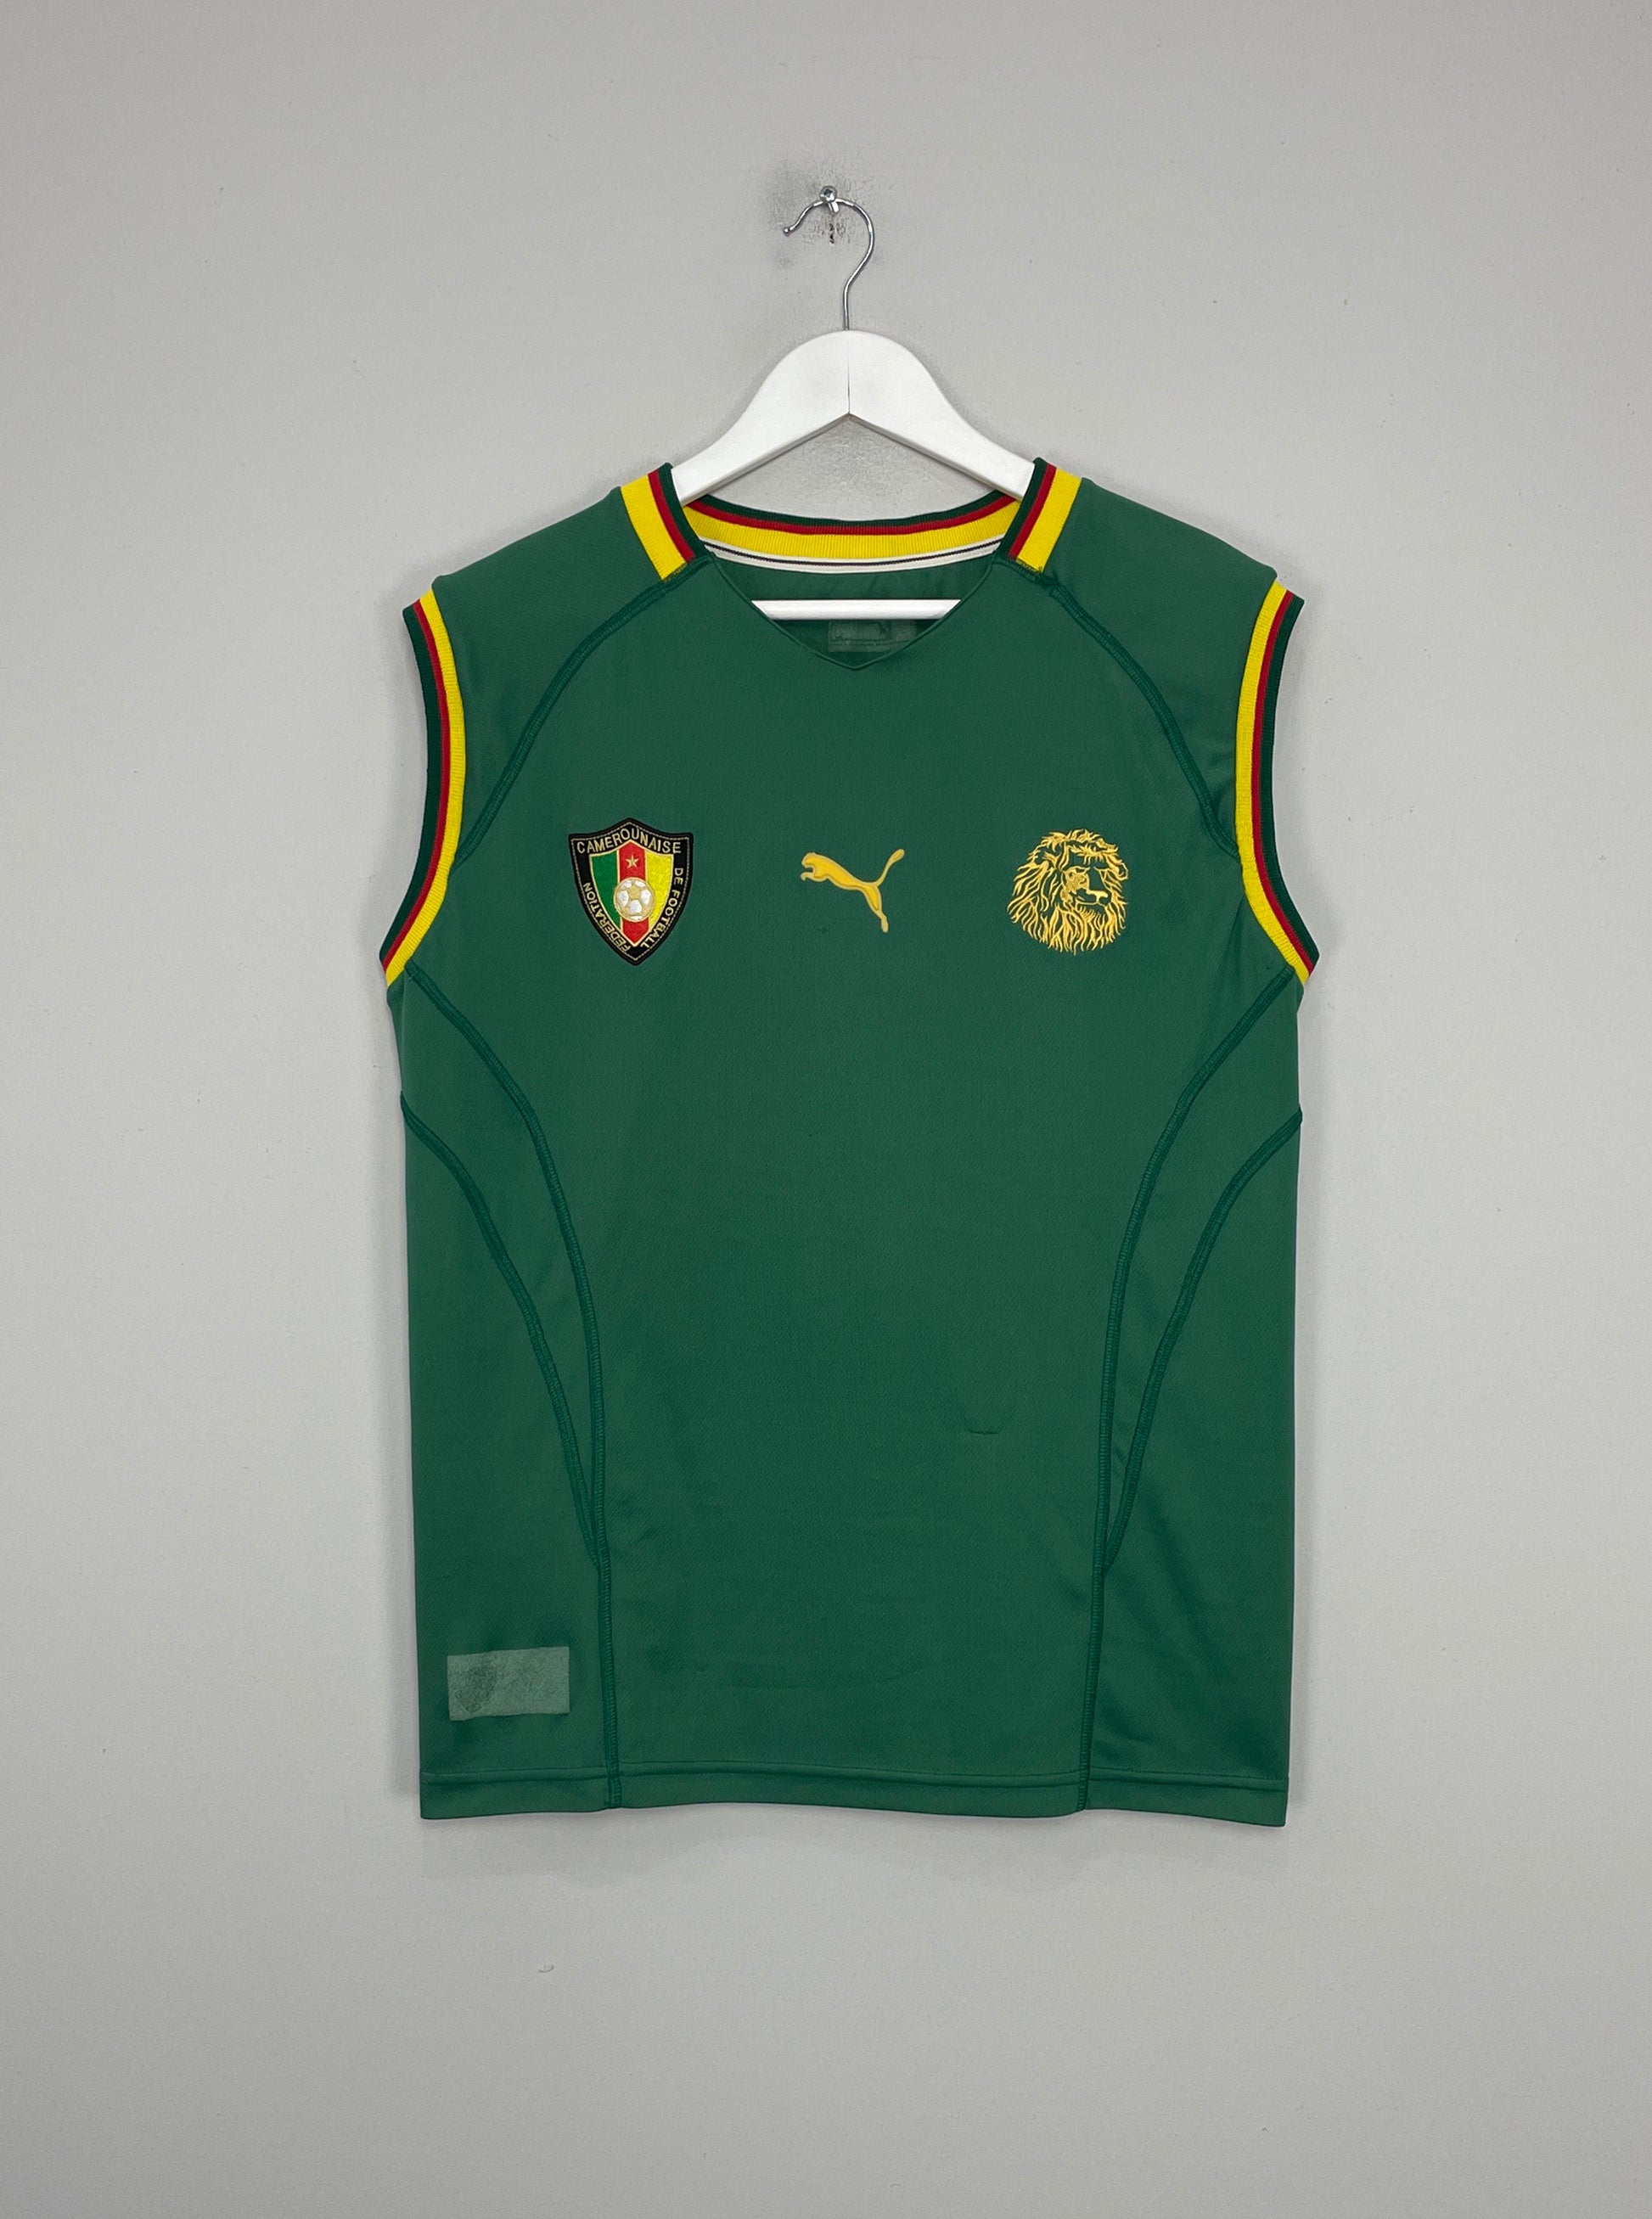 Image of the Cameroon shirt from the 2002/03 season